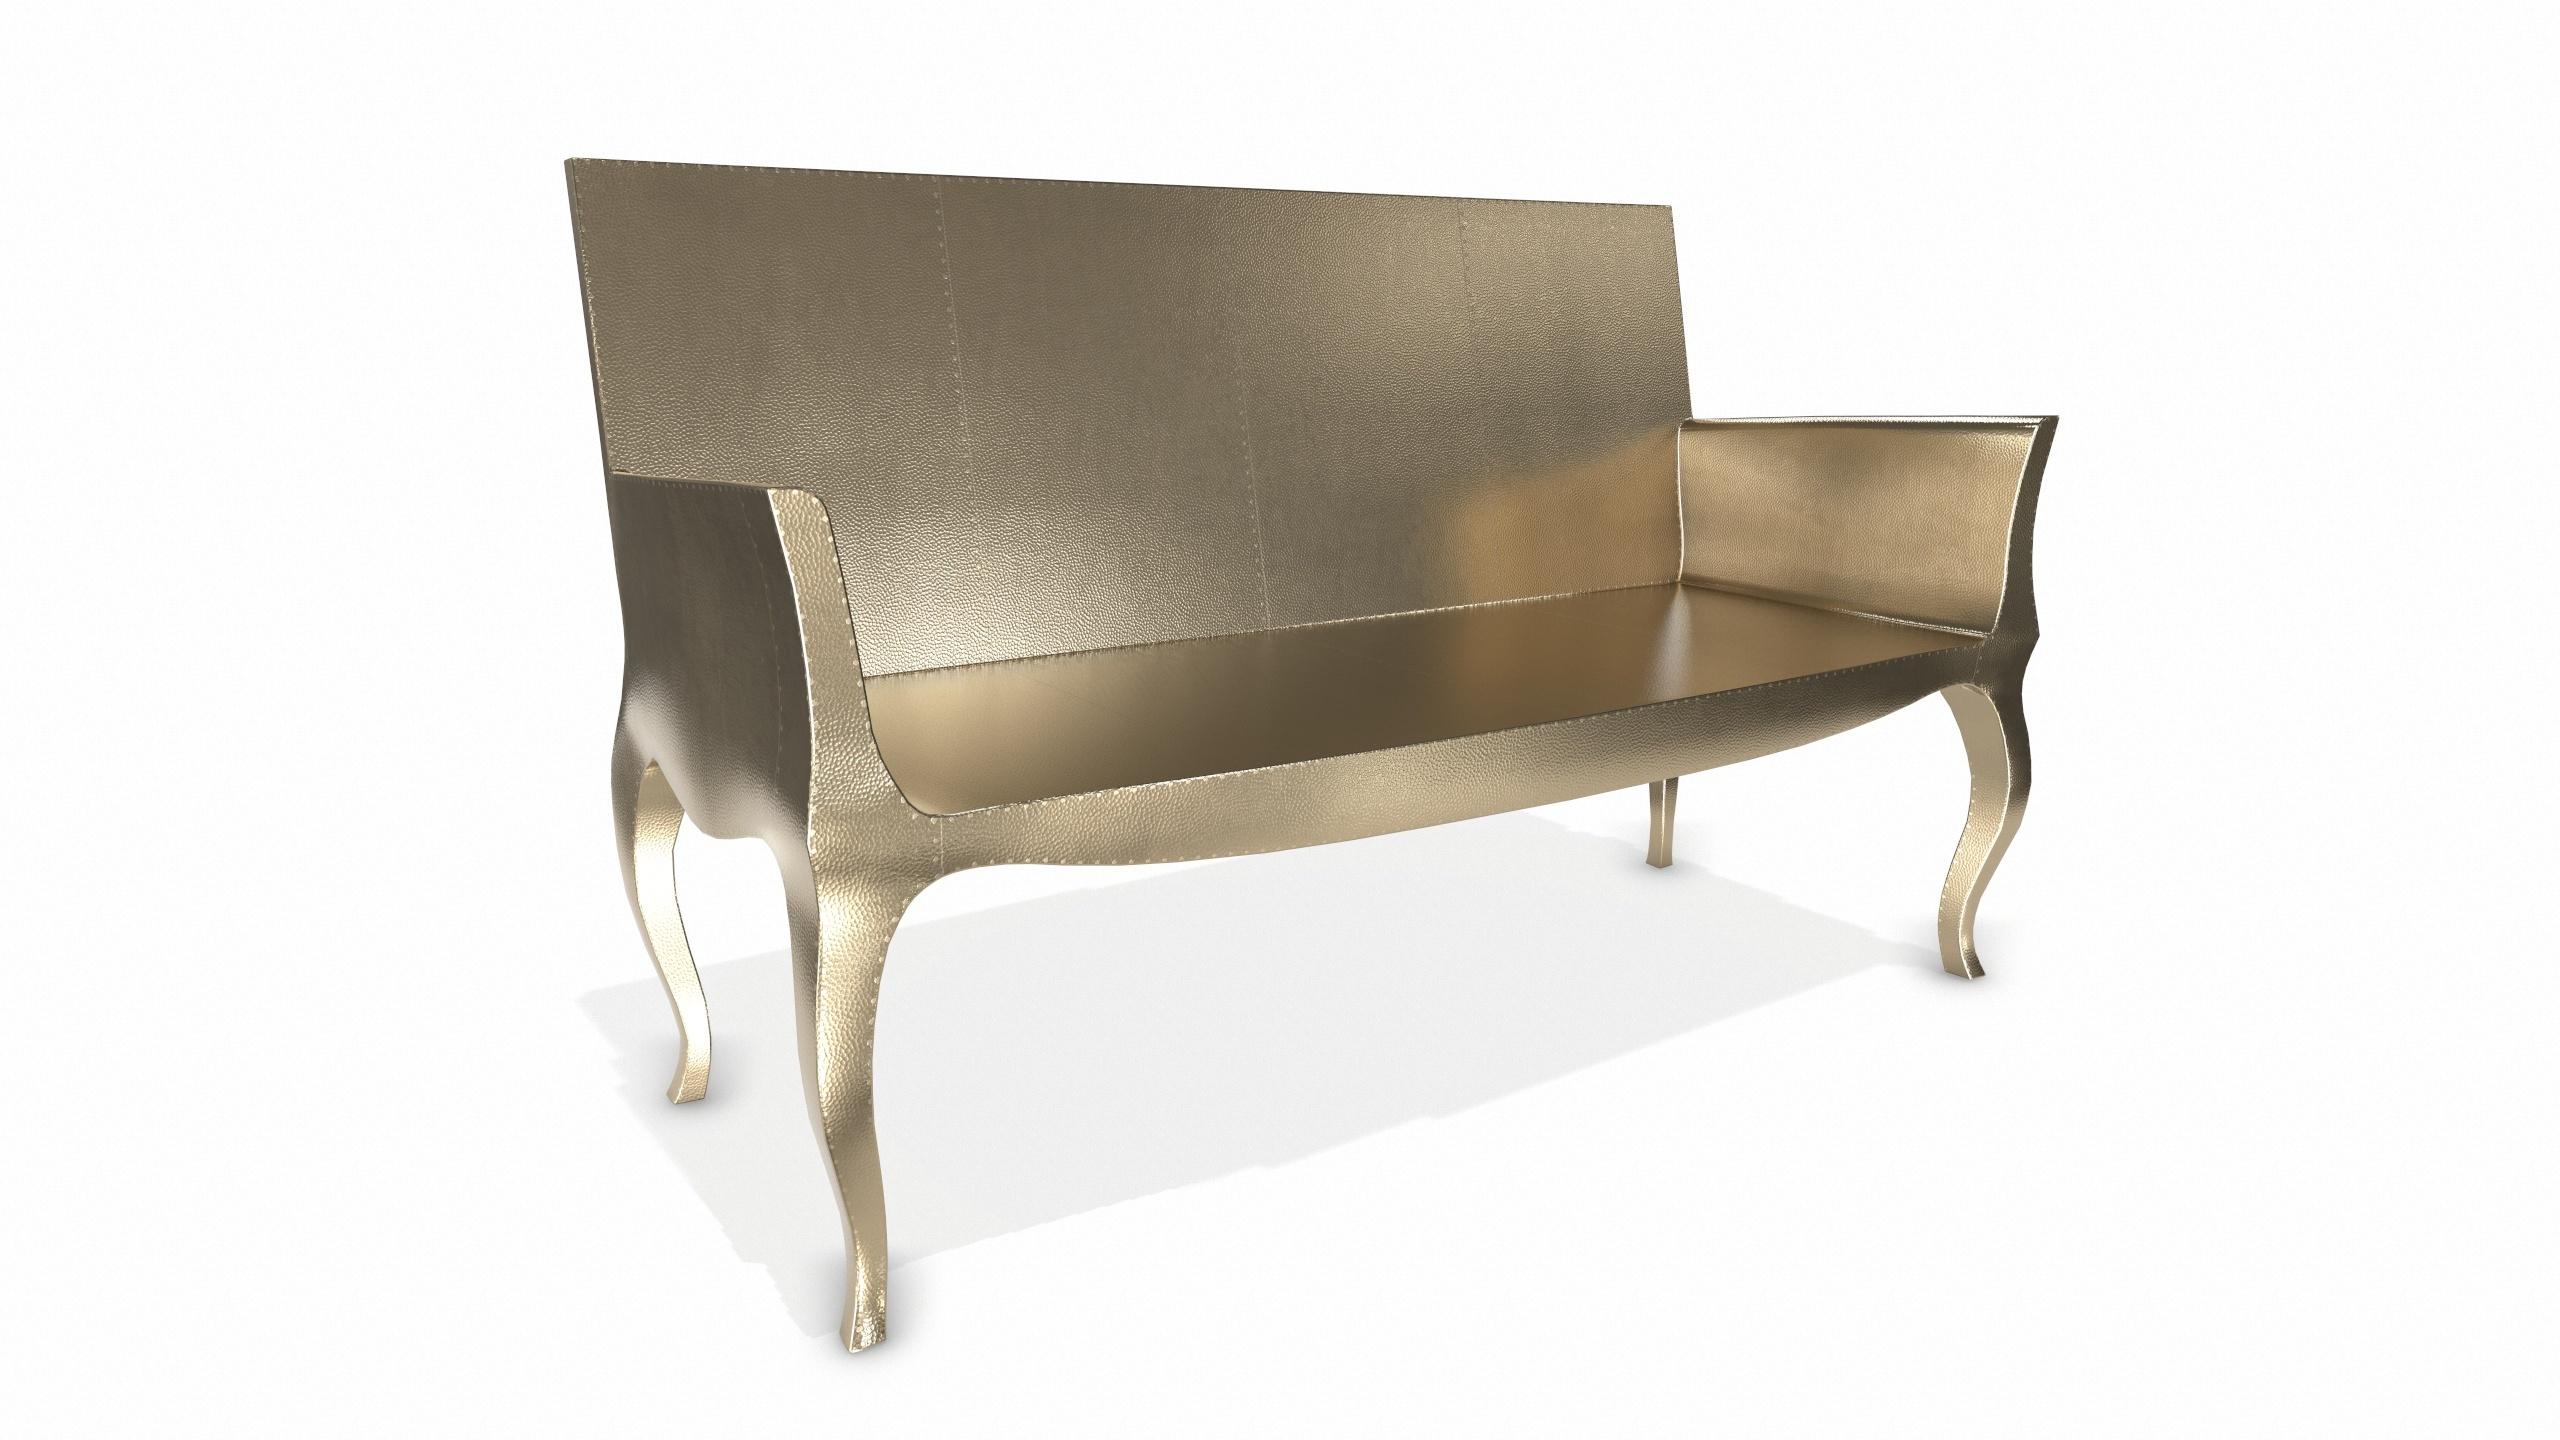 Contemporary Louise Settee Art Deco Lounge Chairs in Mid. Hammered Brass by Paul Mathieu For Sale